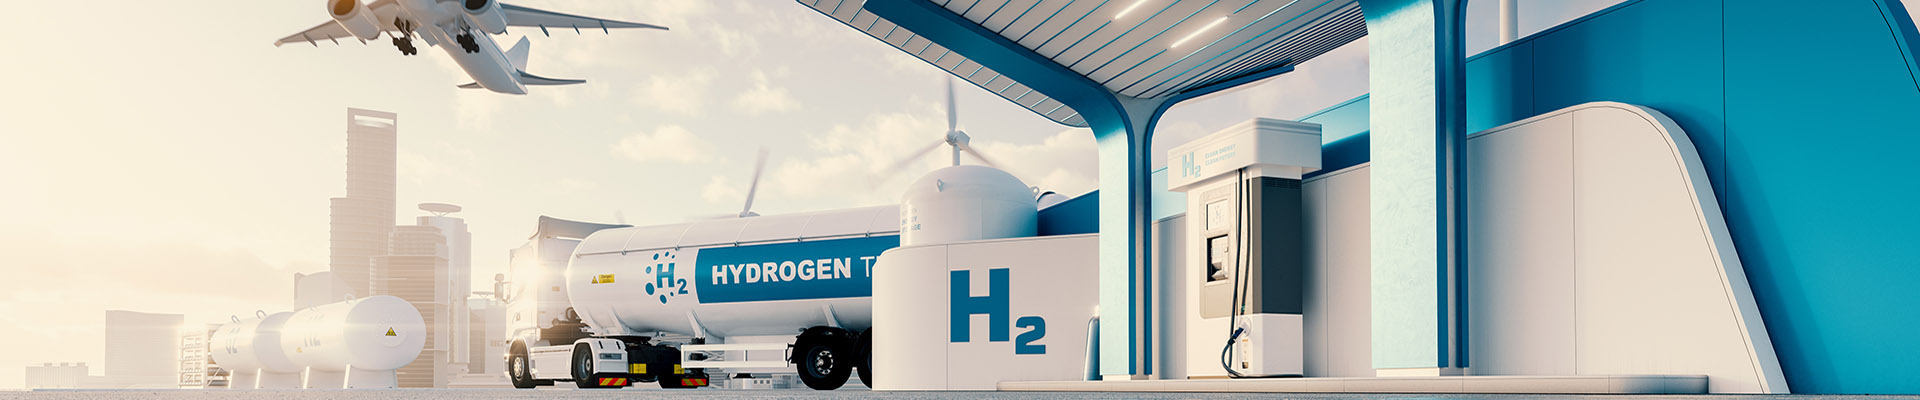 solutions for hydrogen applications